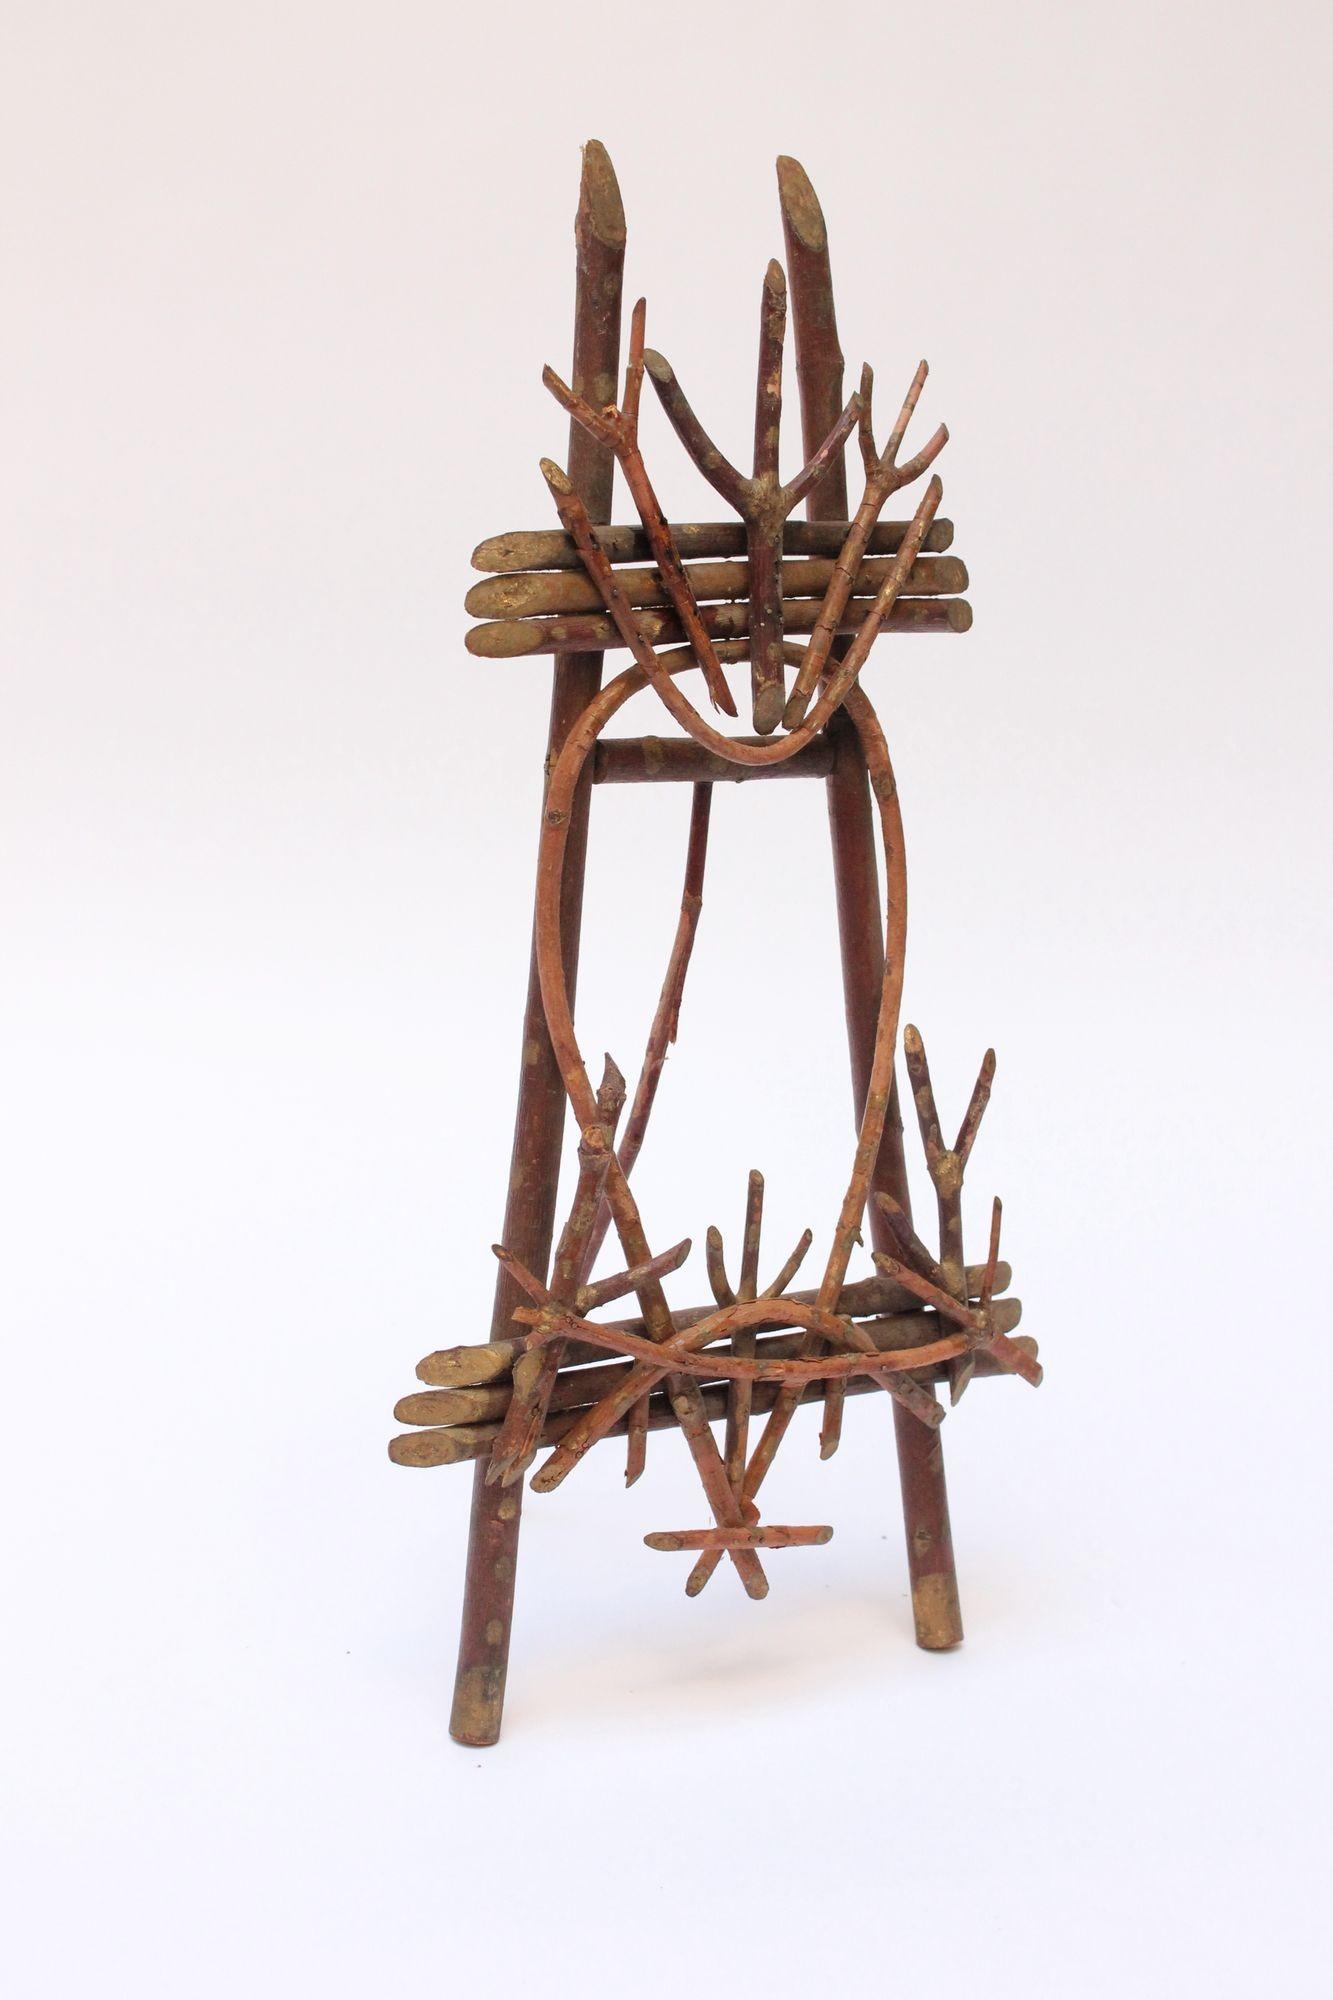 Tabletop easel composed of tree branches nailed together (ca. Mid-20th century, USA).
Wonderful American Folk Art craft in the Adirondack / Rustic style. 
There is a slim branch on the back attached to a dense cylindrical log that supports the